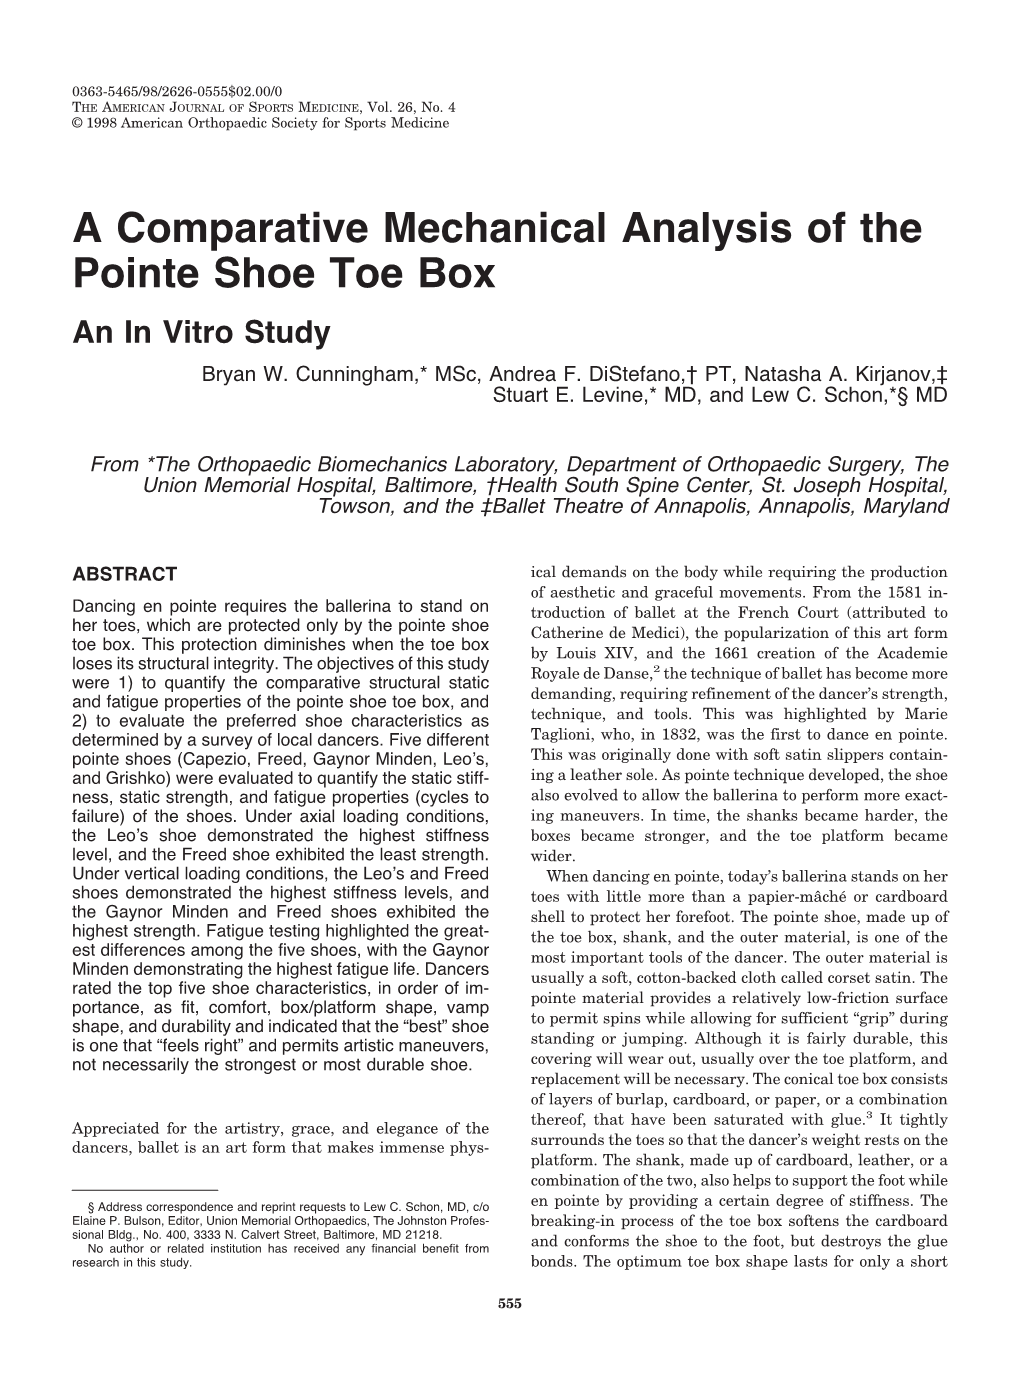 A Comparative Mechanical Analysis of the Pointe Shoe Toe Box an in Vitro Study Bryan W